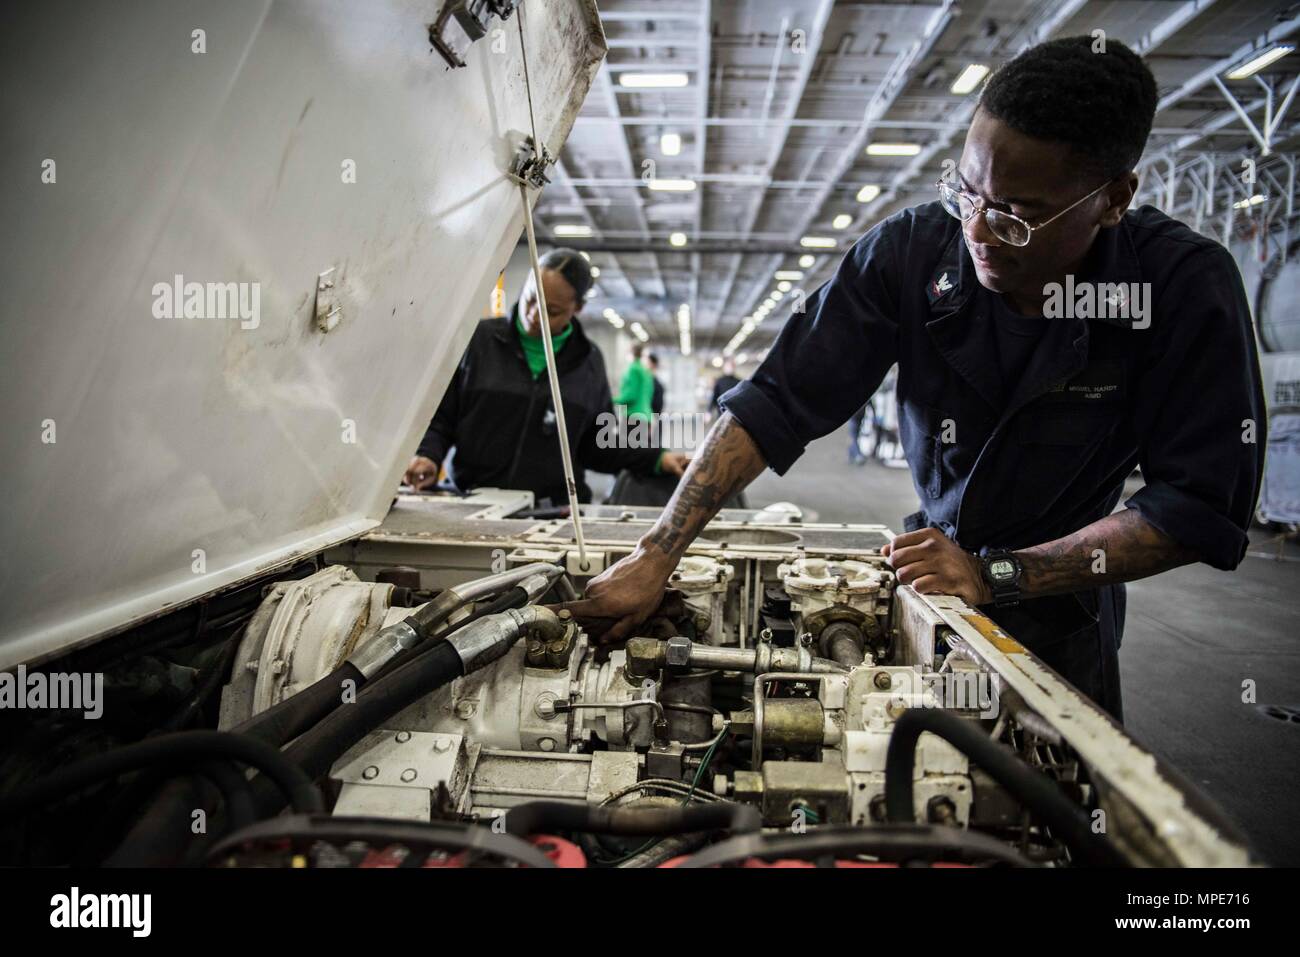 170207-N-IE397-013   ATLANTIC OCEAN (Feb 7, 2017) Aviation Support Equipment Technician 3rd Class Miguel Hardy, from Ft. Worth, Texas, conducts maintenance on a flight deck tractor in the hangar bay of the aircraft carrier USS Dwight D. Eisenhower (CVN 69) (Ike). Ike is currently conducting aircraft carrier qualifications during the sustainment phase of the Optimized Fleet Response Plan (OFRP). (U.S. Navy photo by Mass Communication Specialist 3rd Class Christopher A. Michaels) Stock Photo